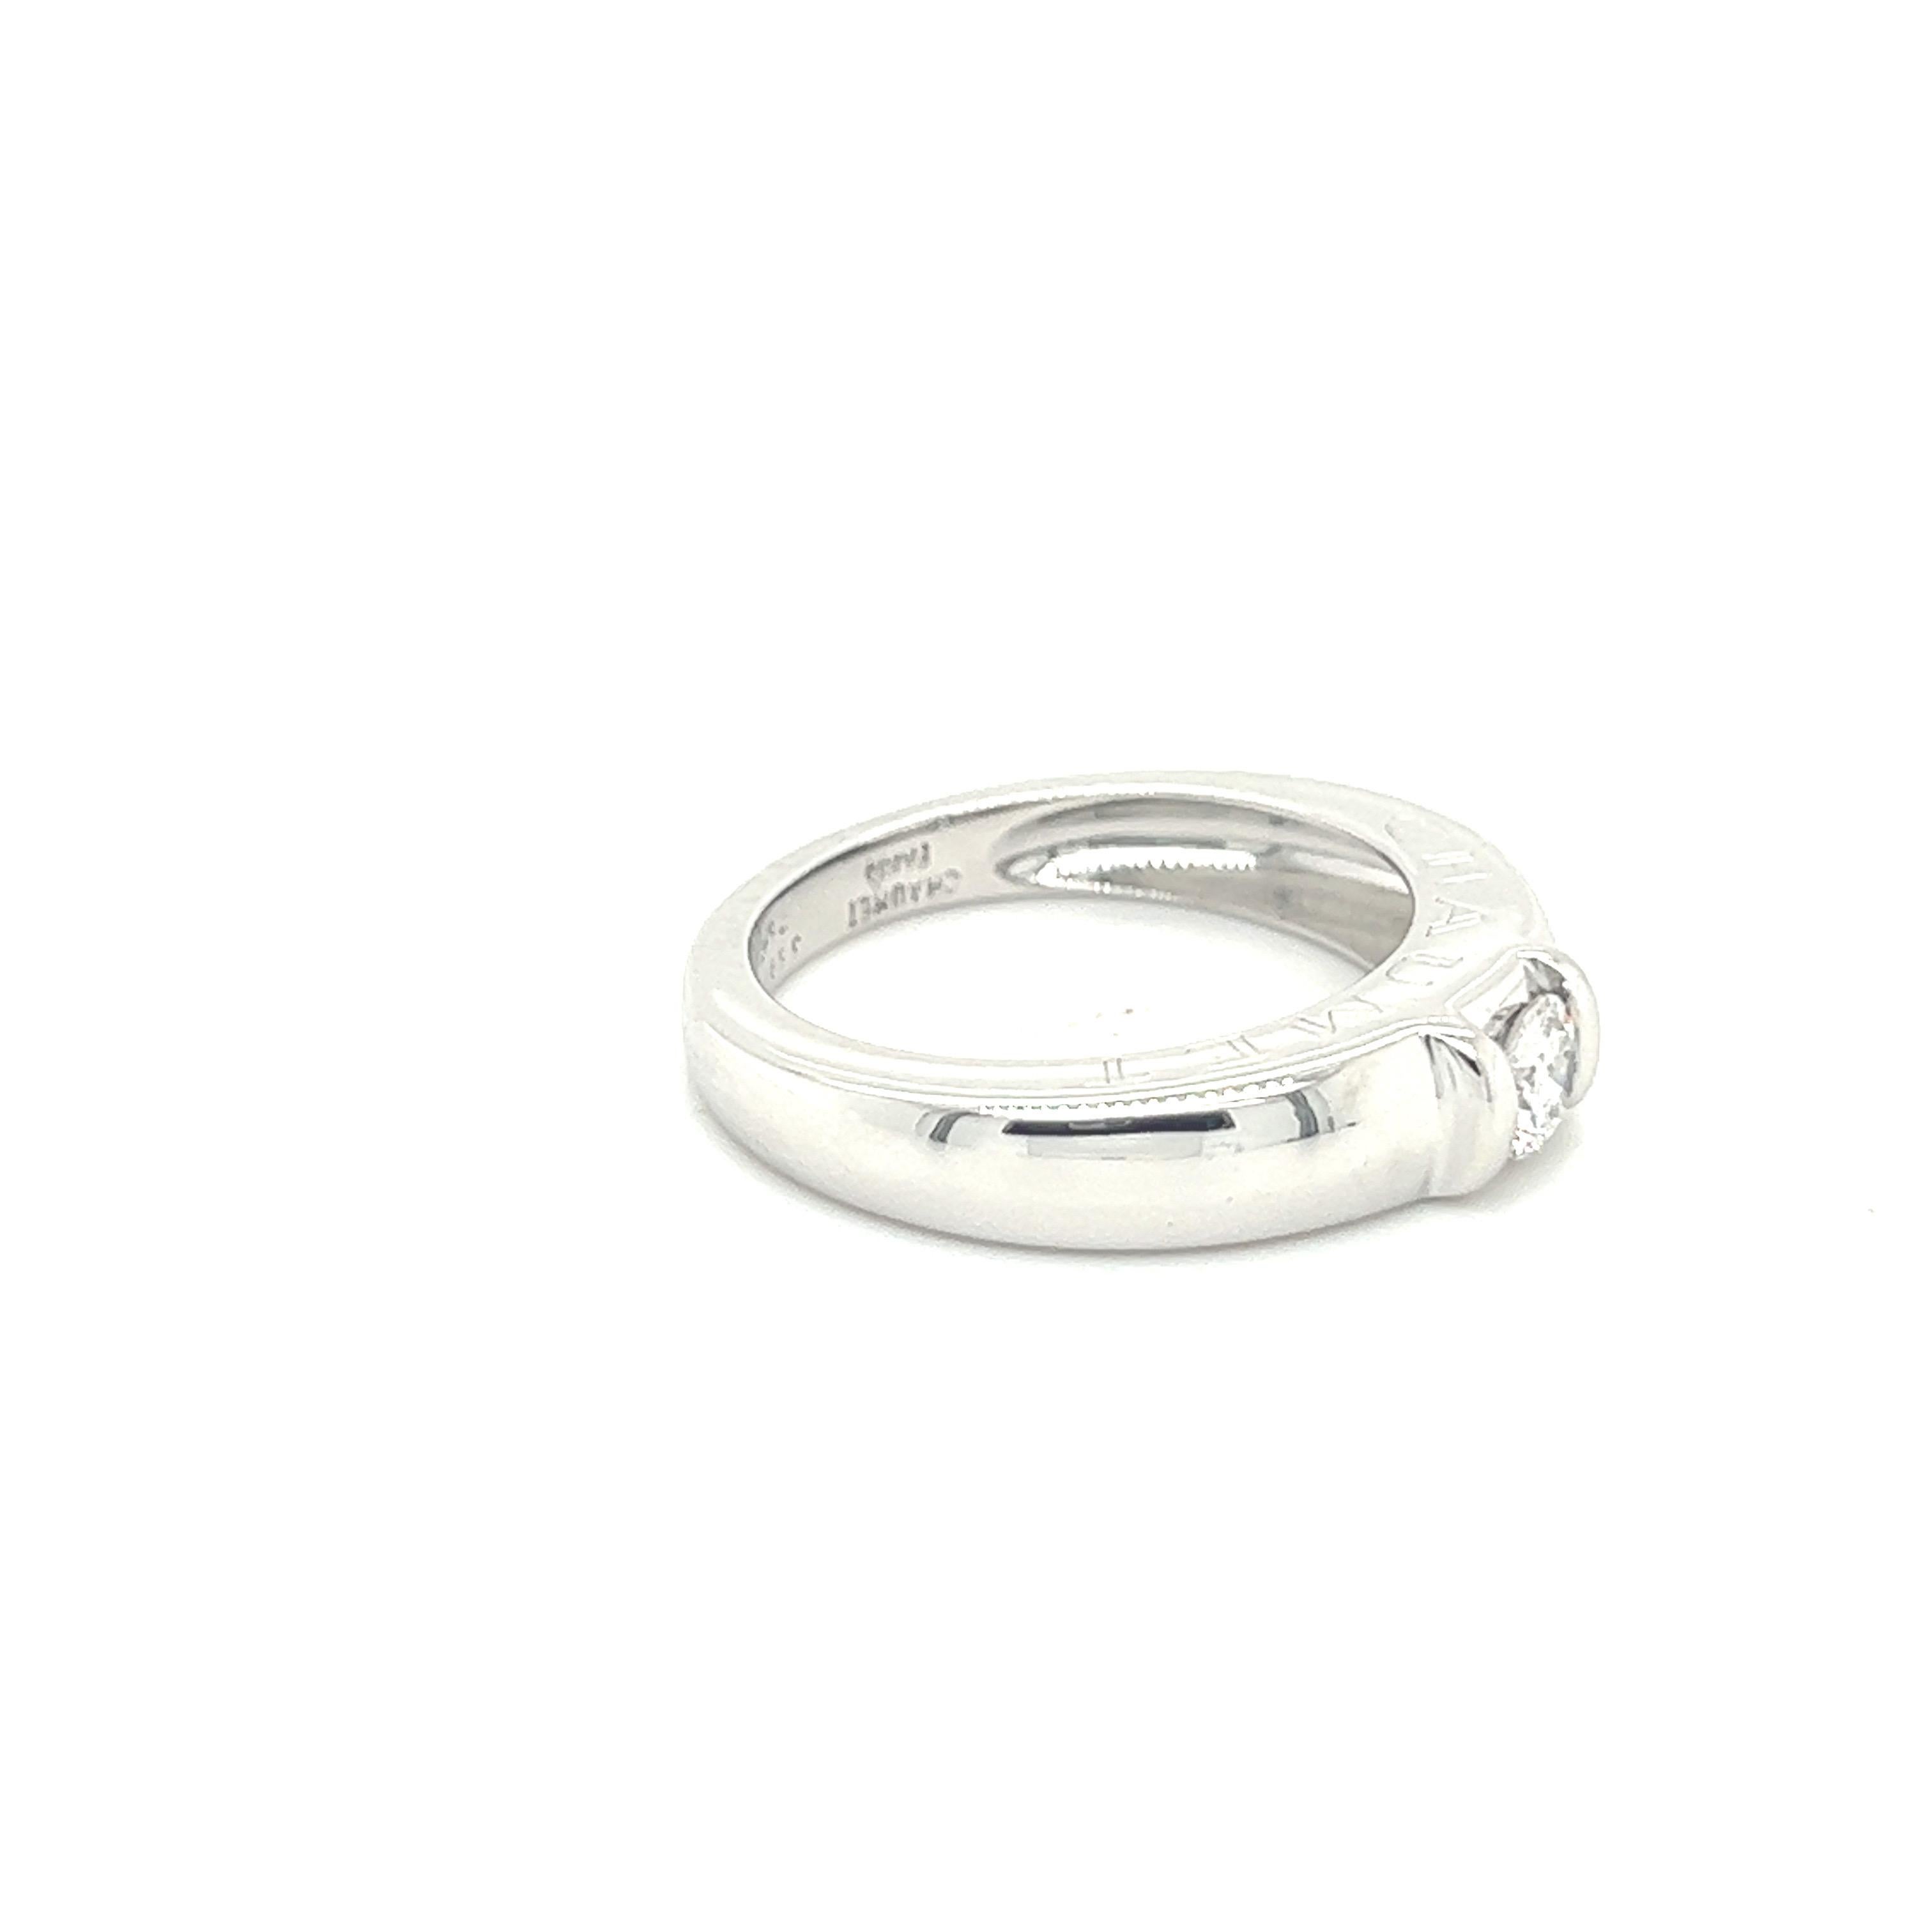 Contemporary Beautiful Chaumet White Gold and Diamond Ring 0.25 Carat For Sale